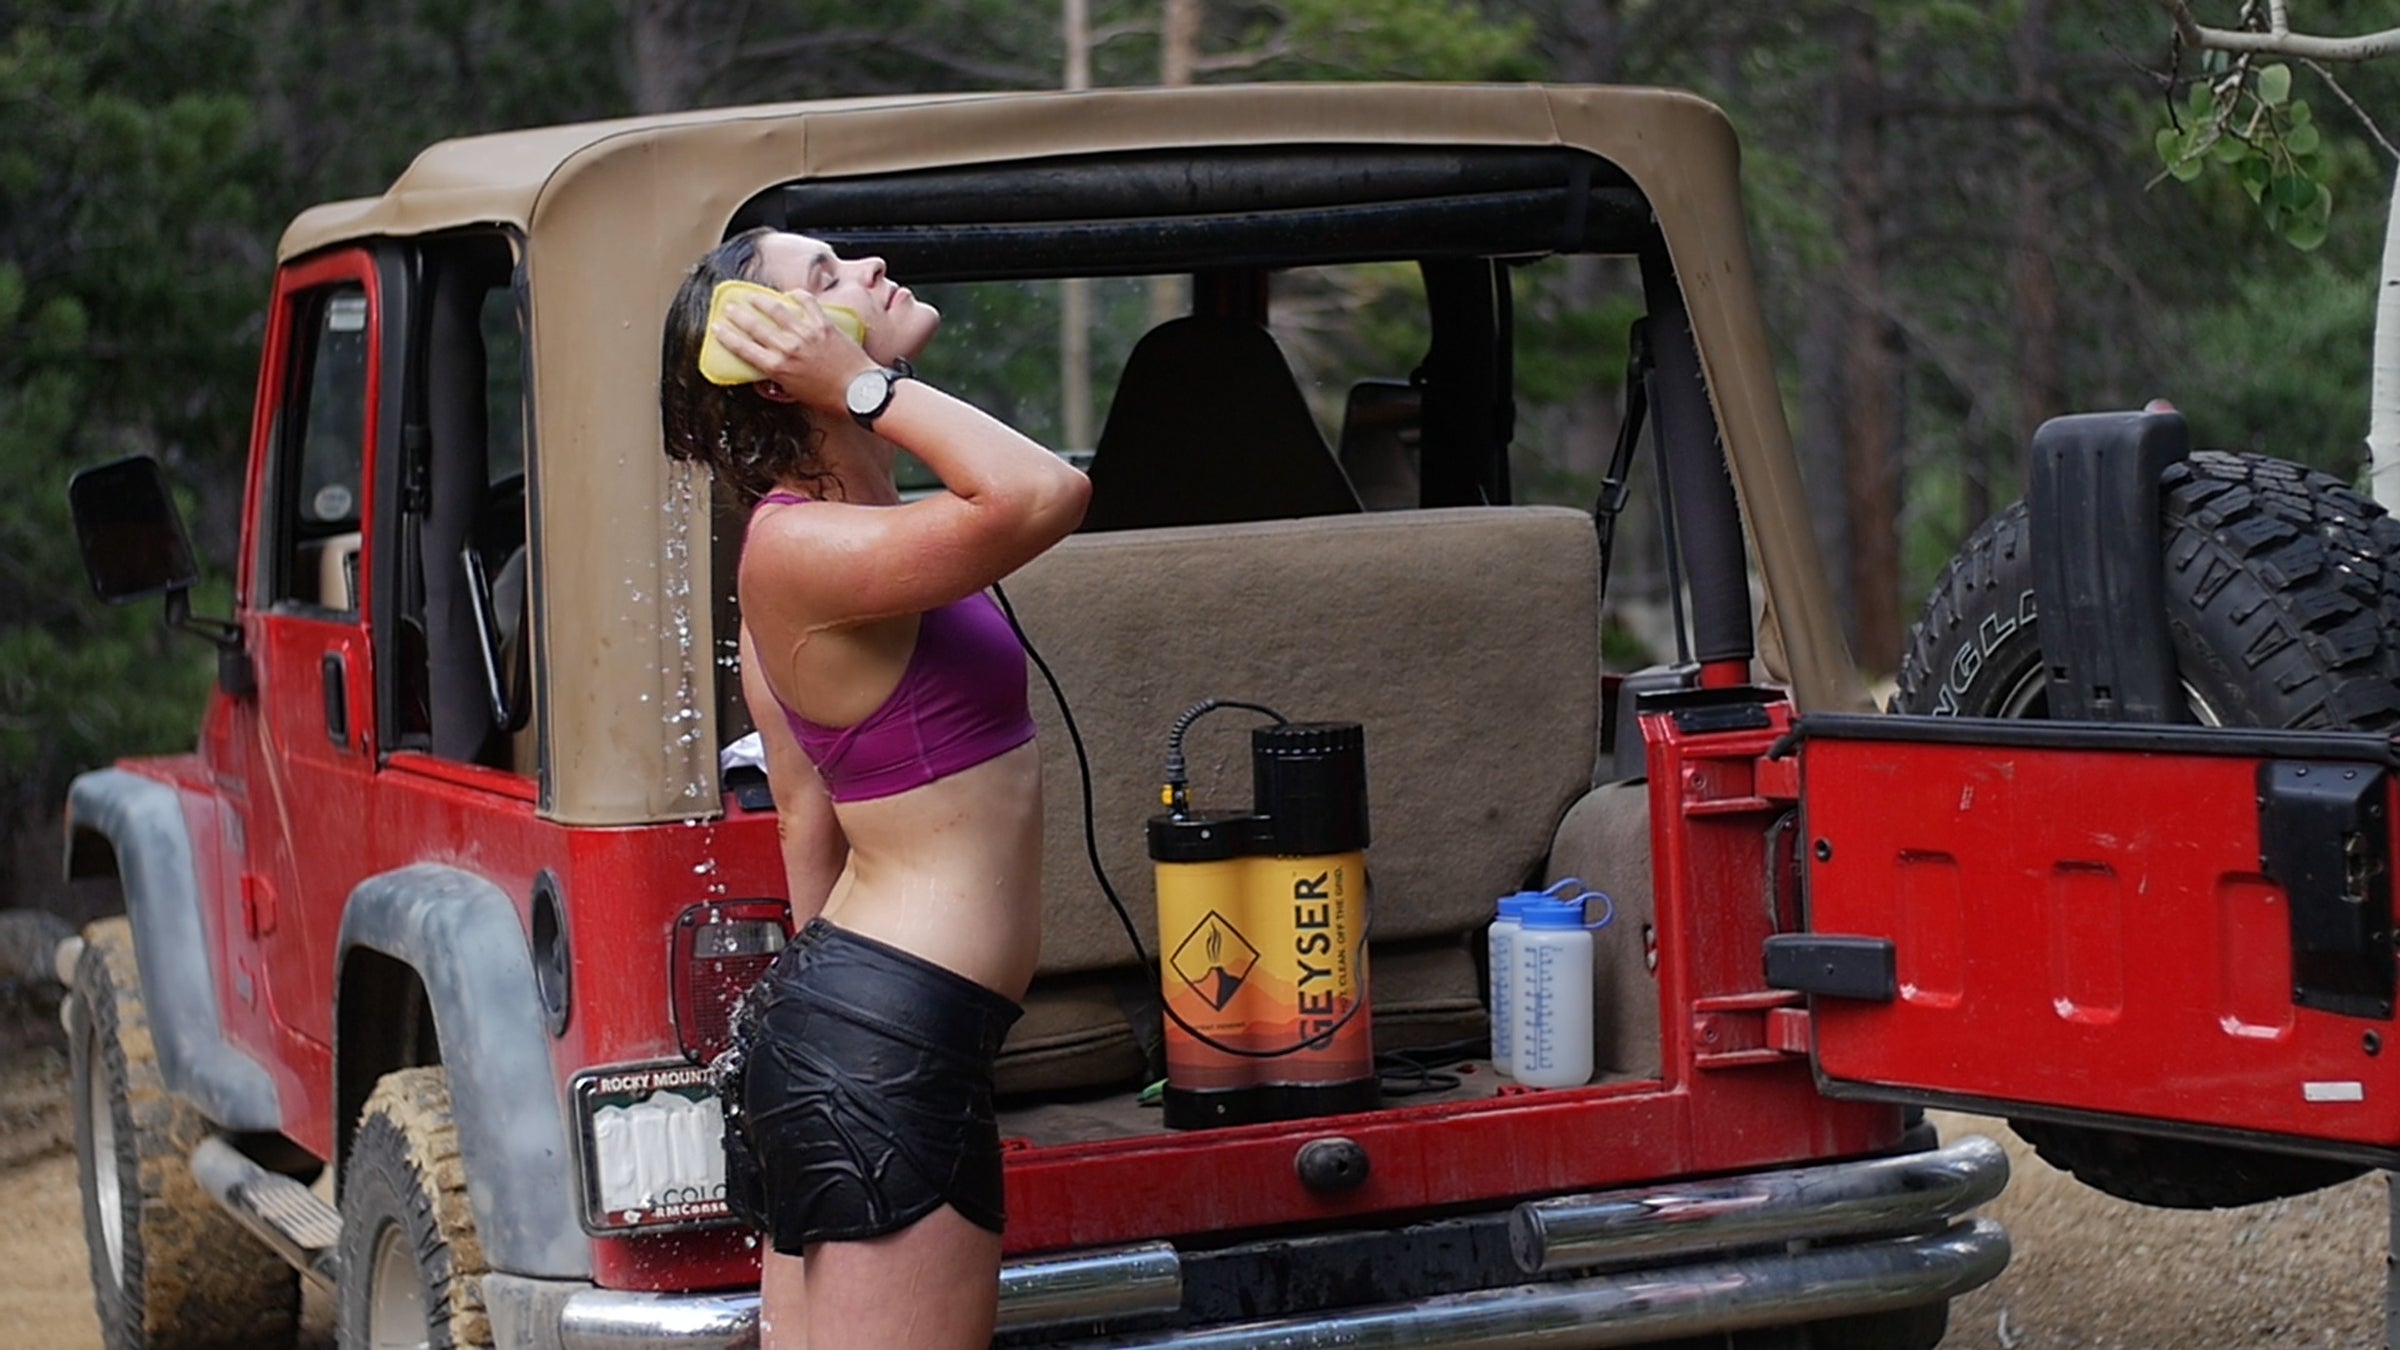 Our Portable Shower for Camping: Hot H20 Solution for Less Than $40 